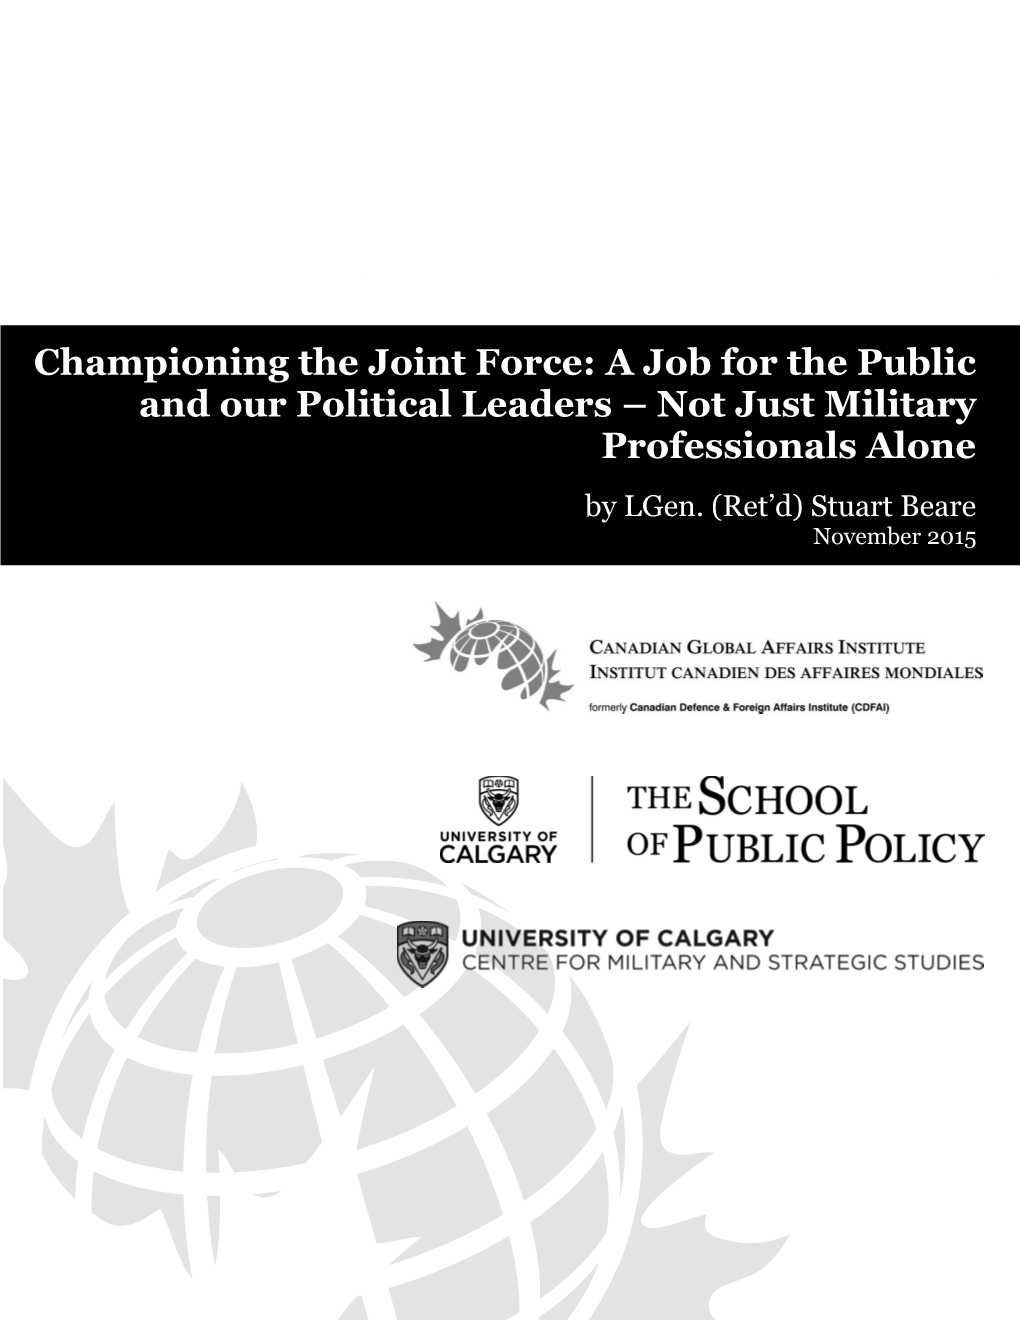 Championing the Joint Force: a Job for the Public and Our Political Leaders – Not Just Military Professionals Alone*